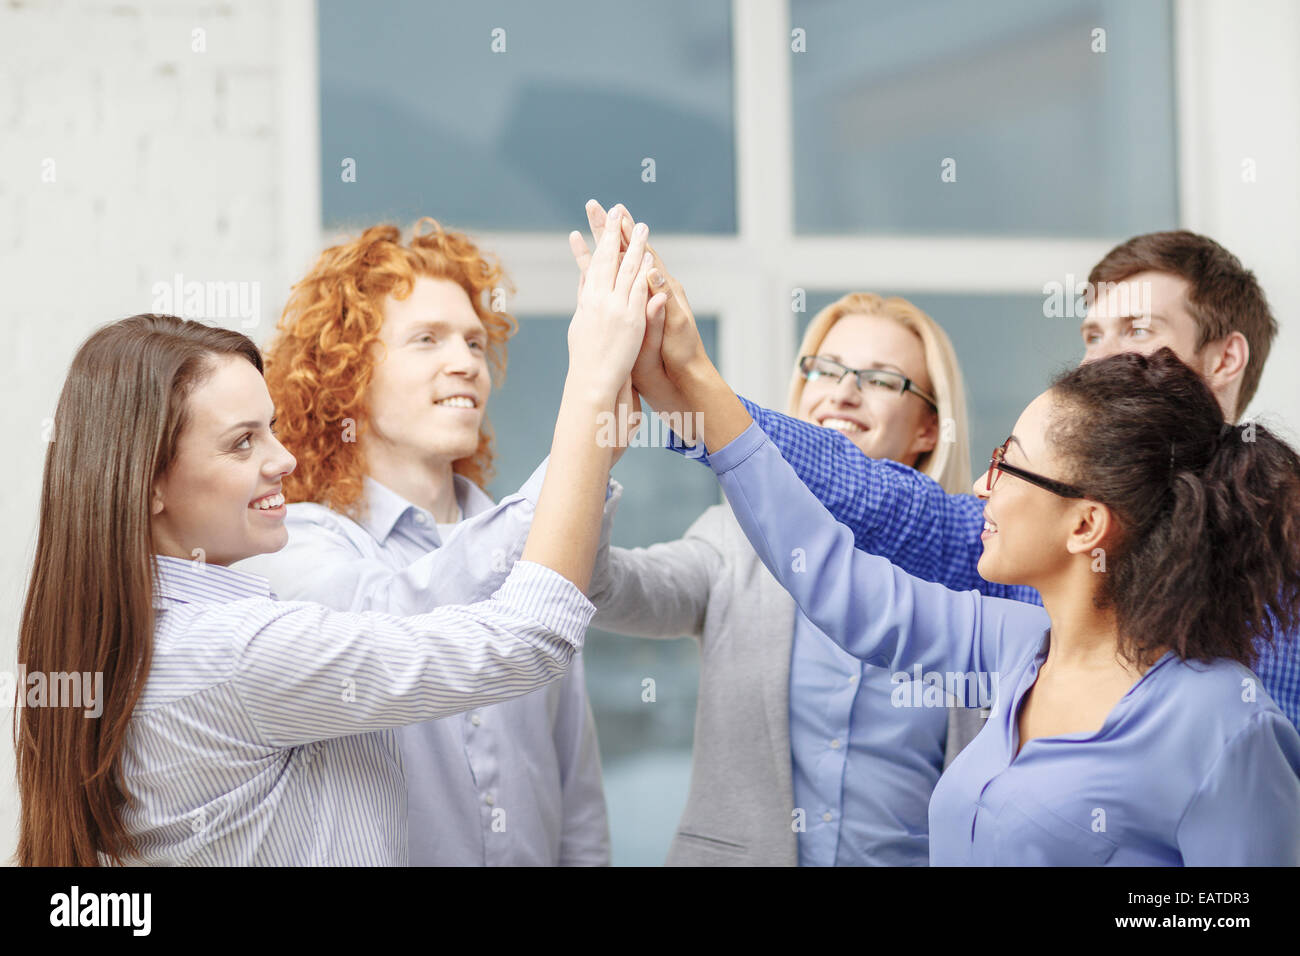 creative team doing high five gesture in office Stock Photo